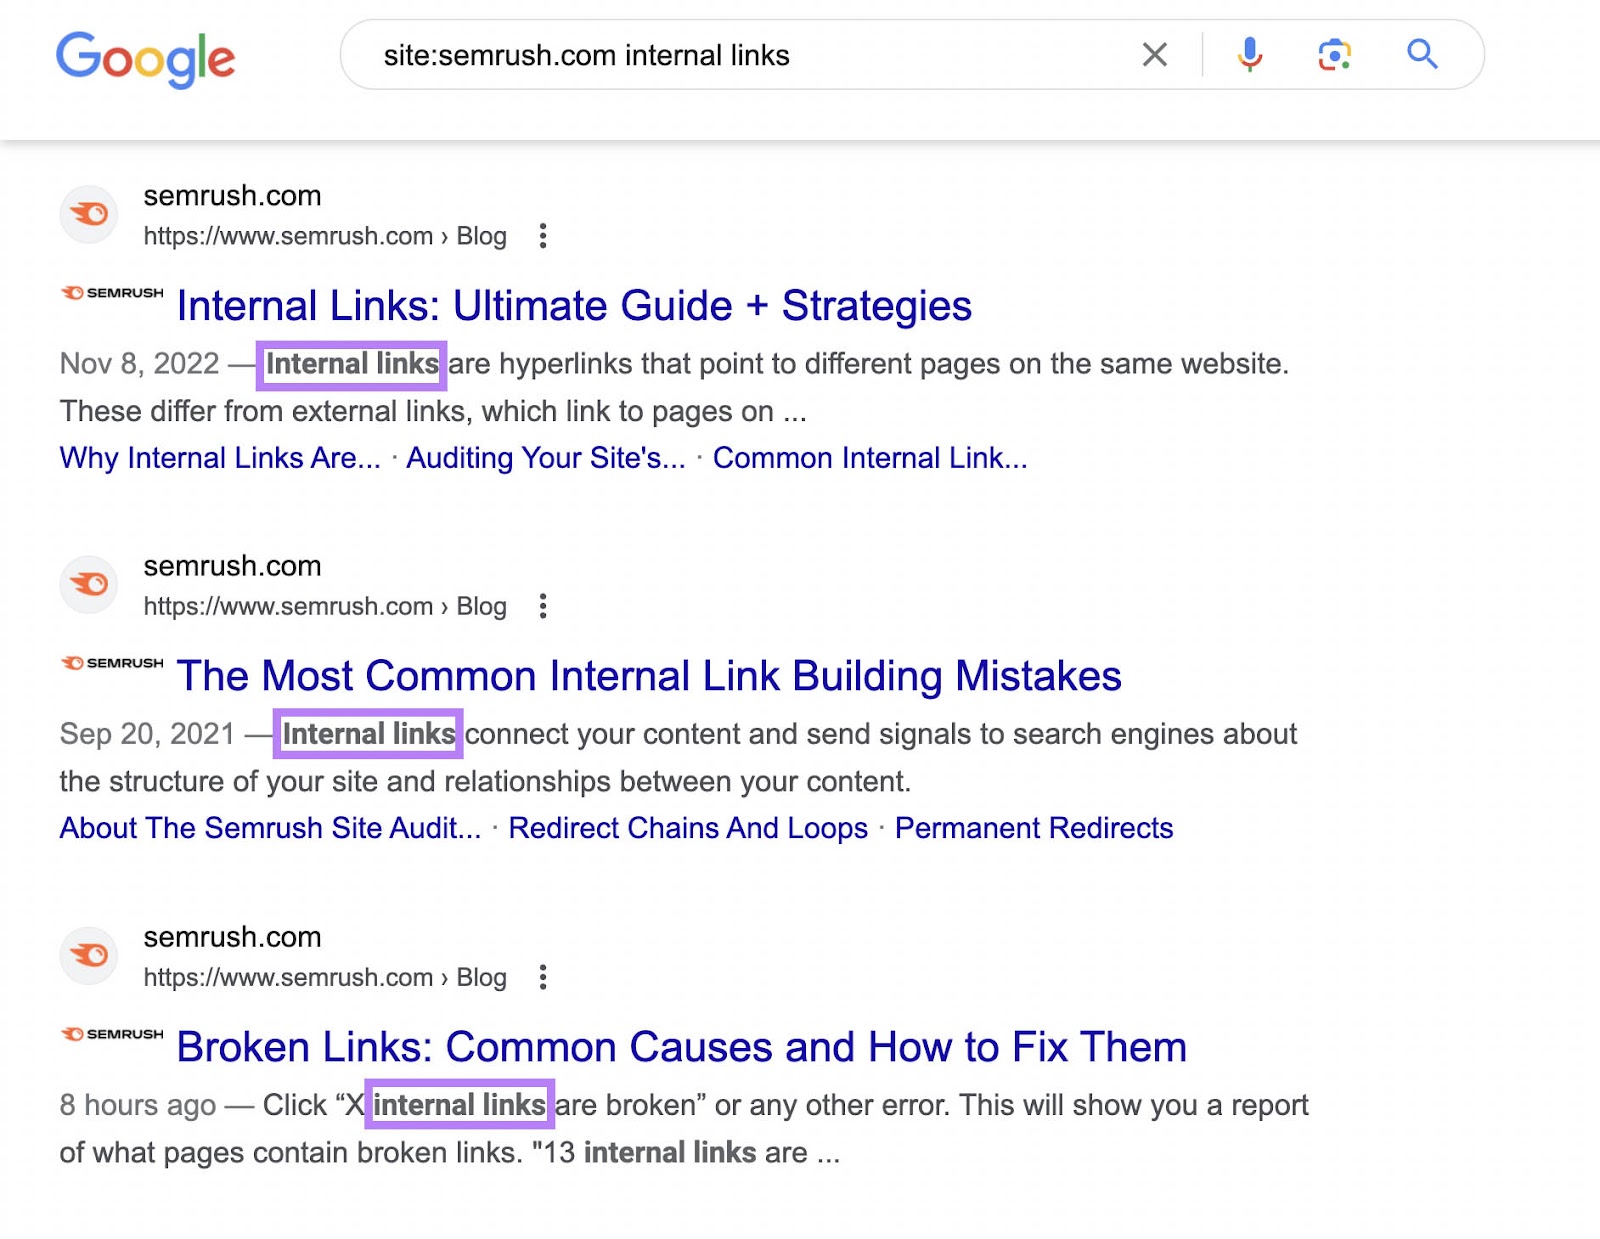 Google search results for “site:semrush.com internal links” query